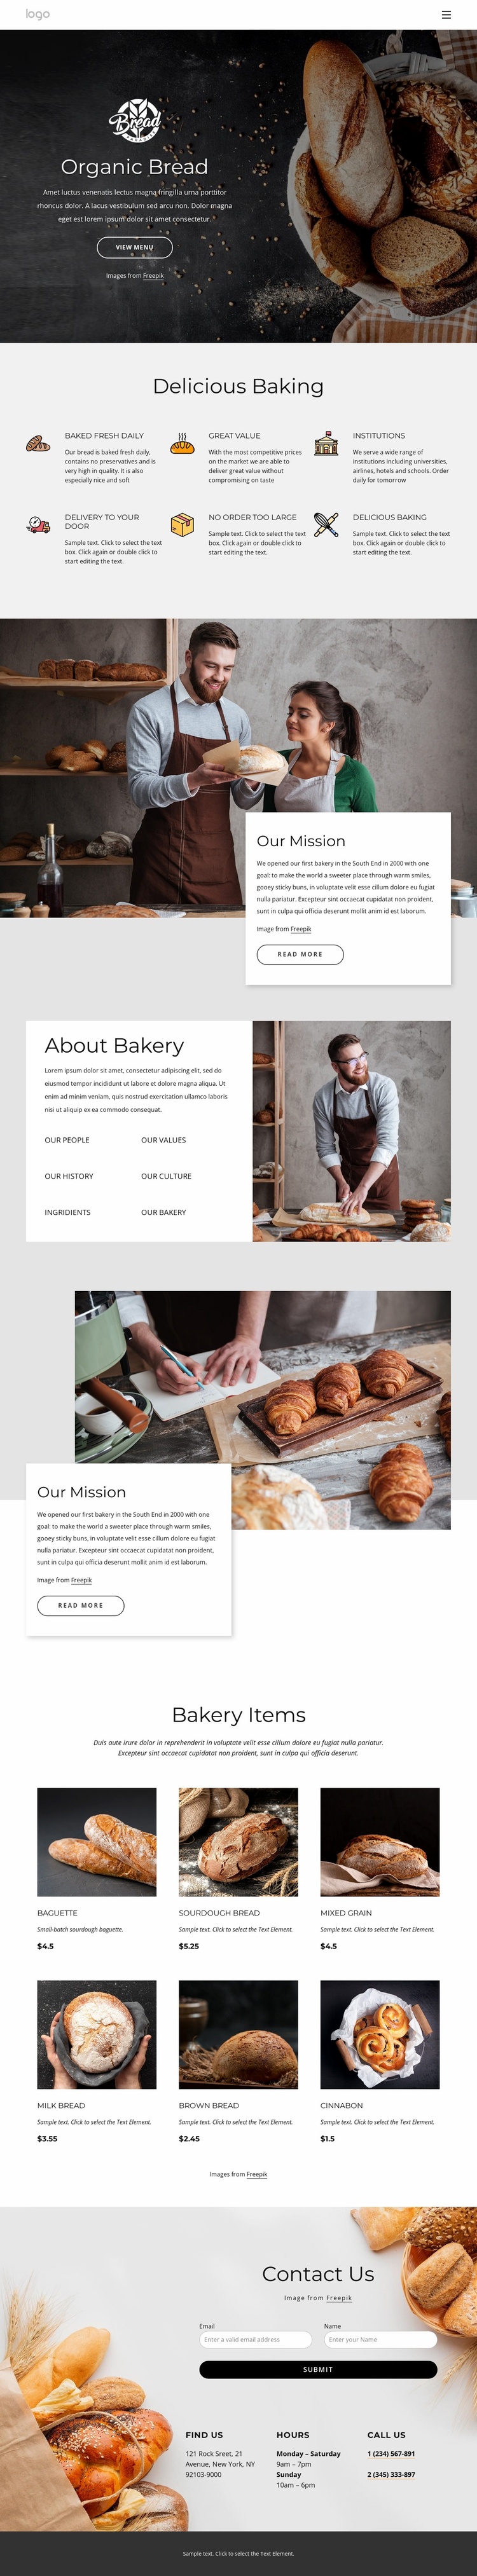 Bagels, buns, rolls, biscuits and loaf breads Landing Page